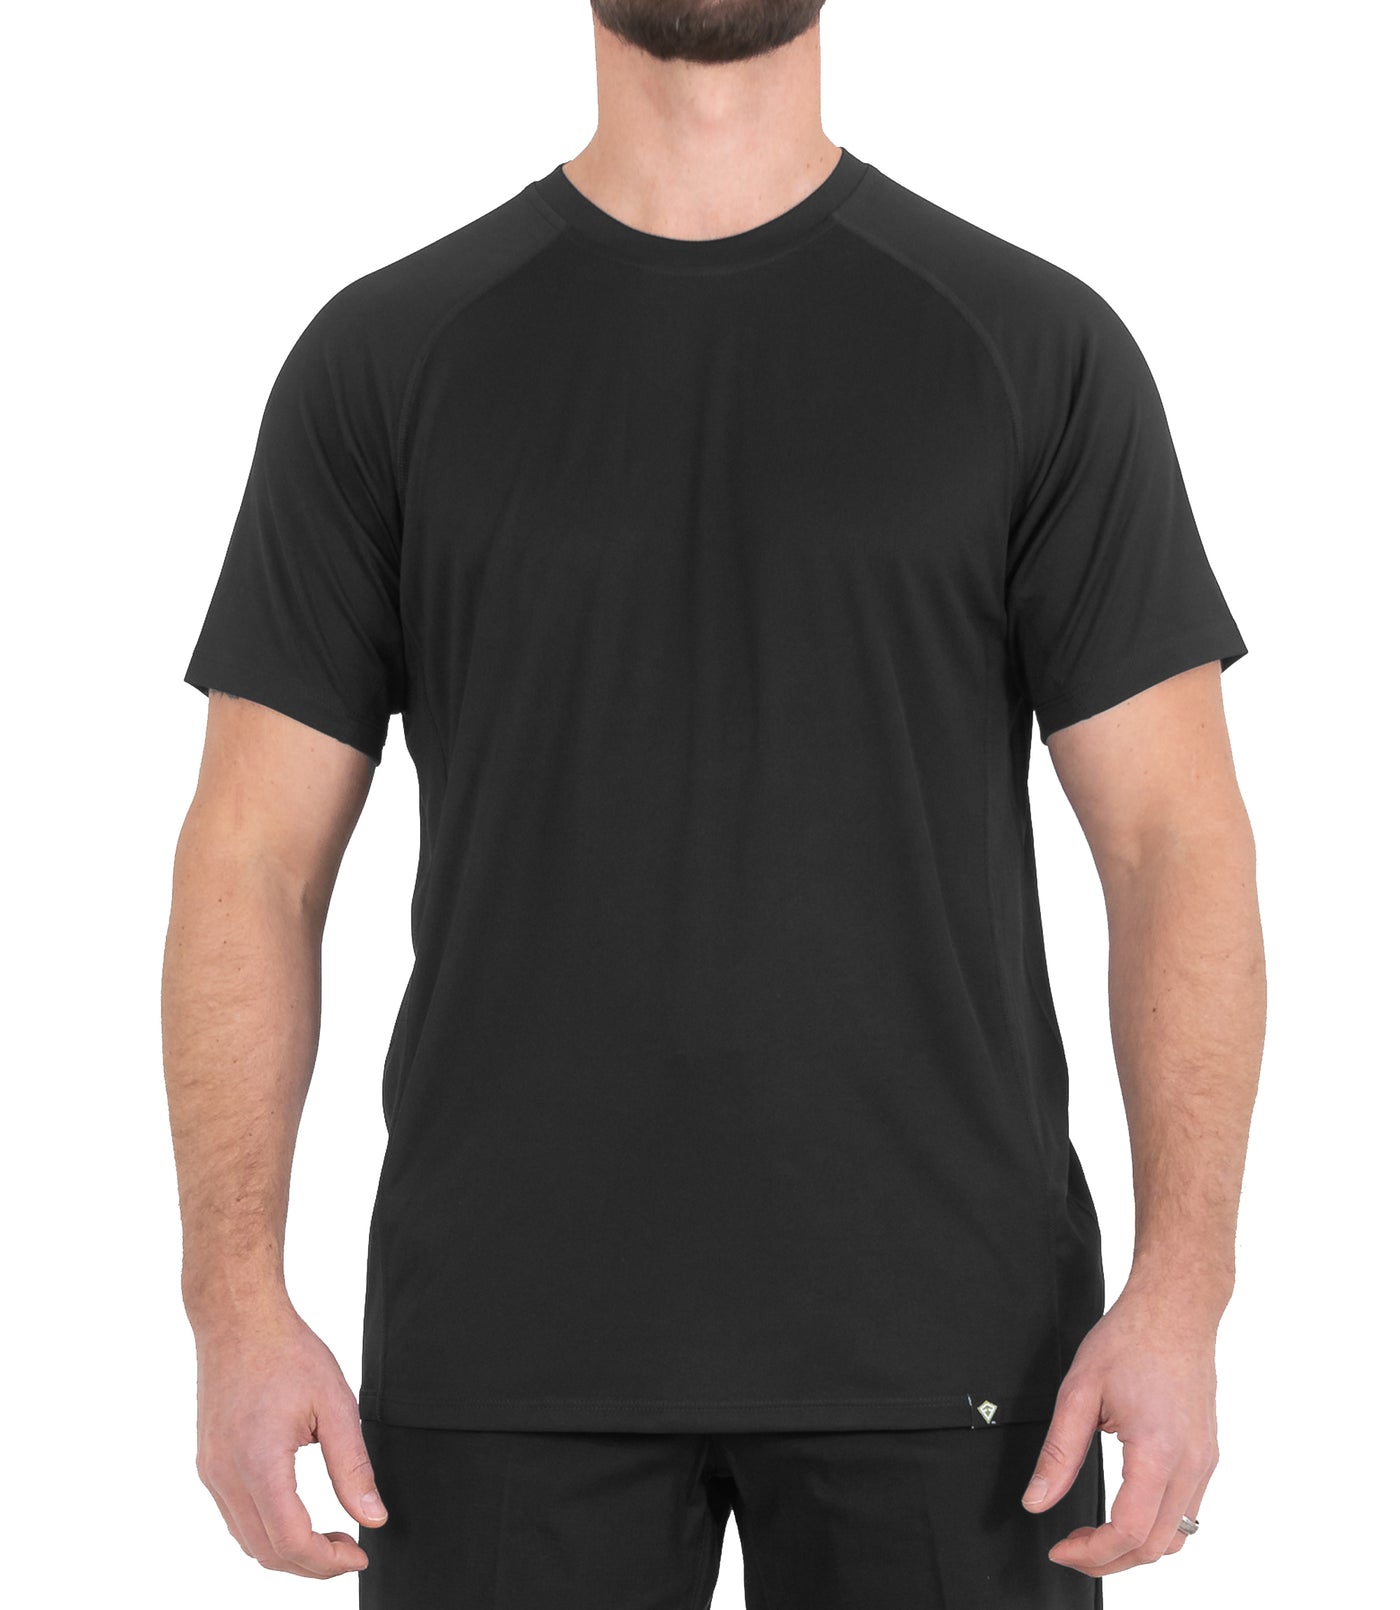 Untucked Front of Men’s Performance Short Sleeve T-Shirt in Black